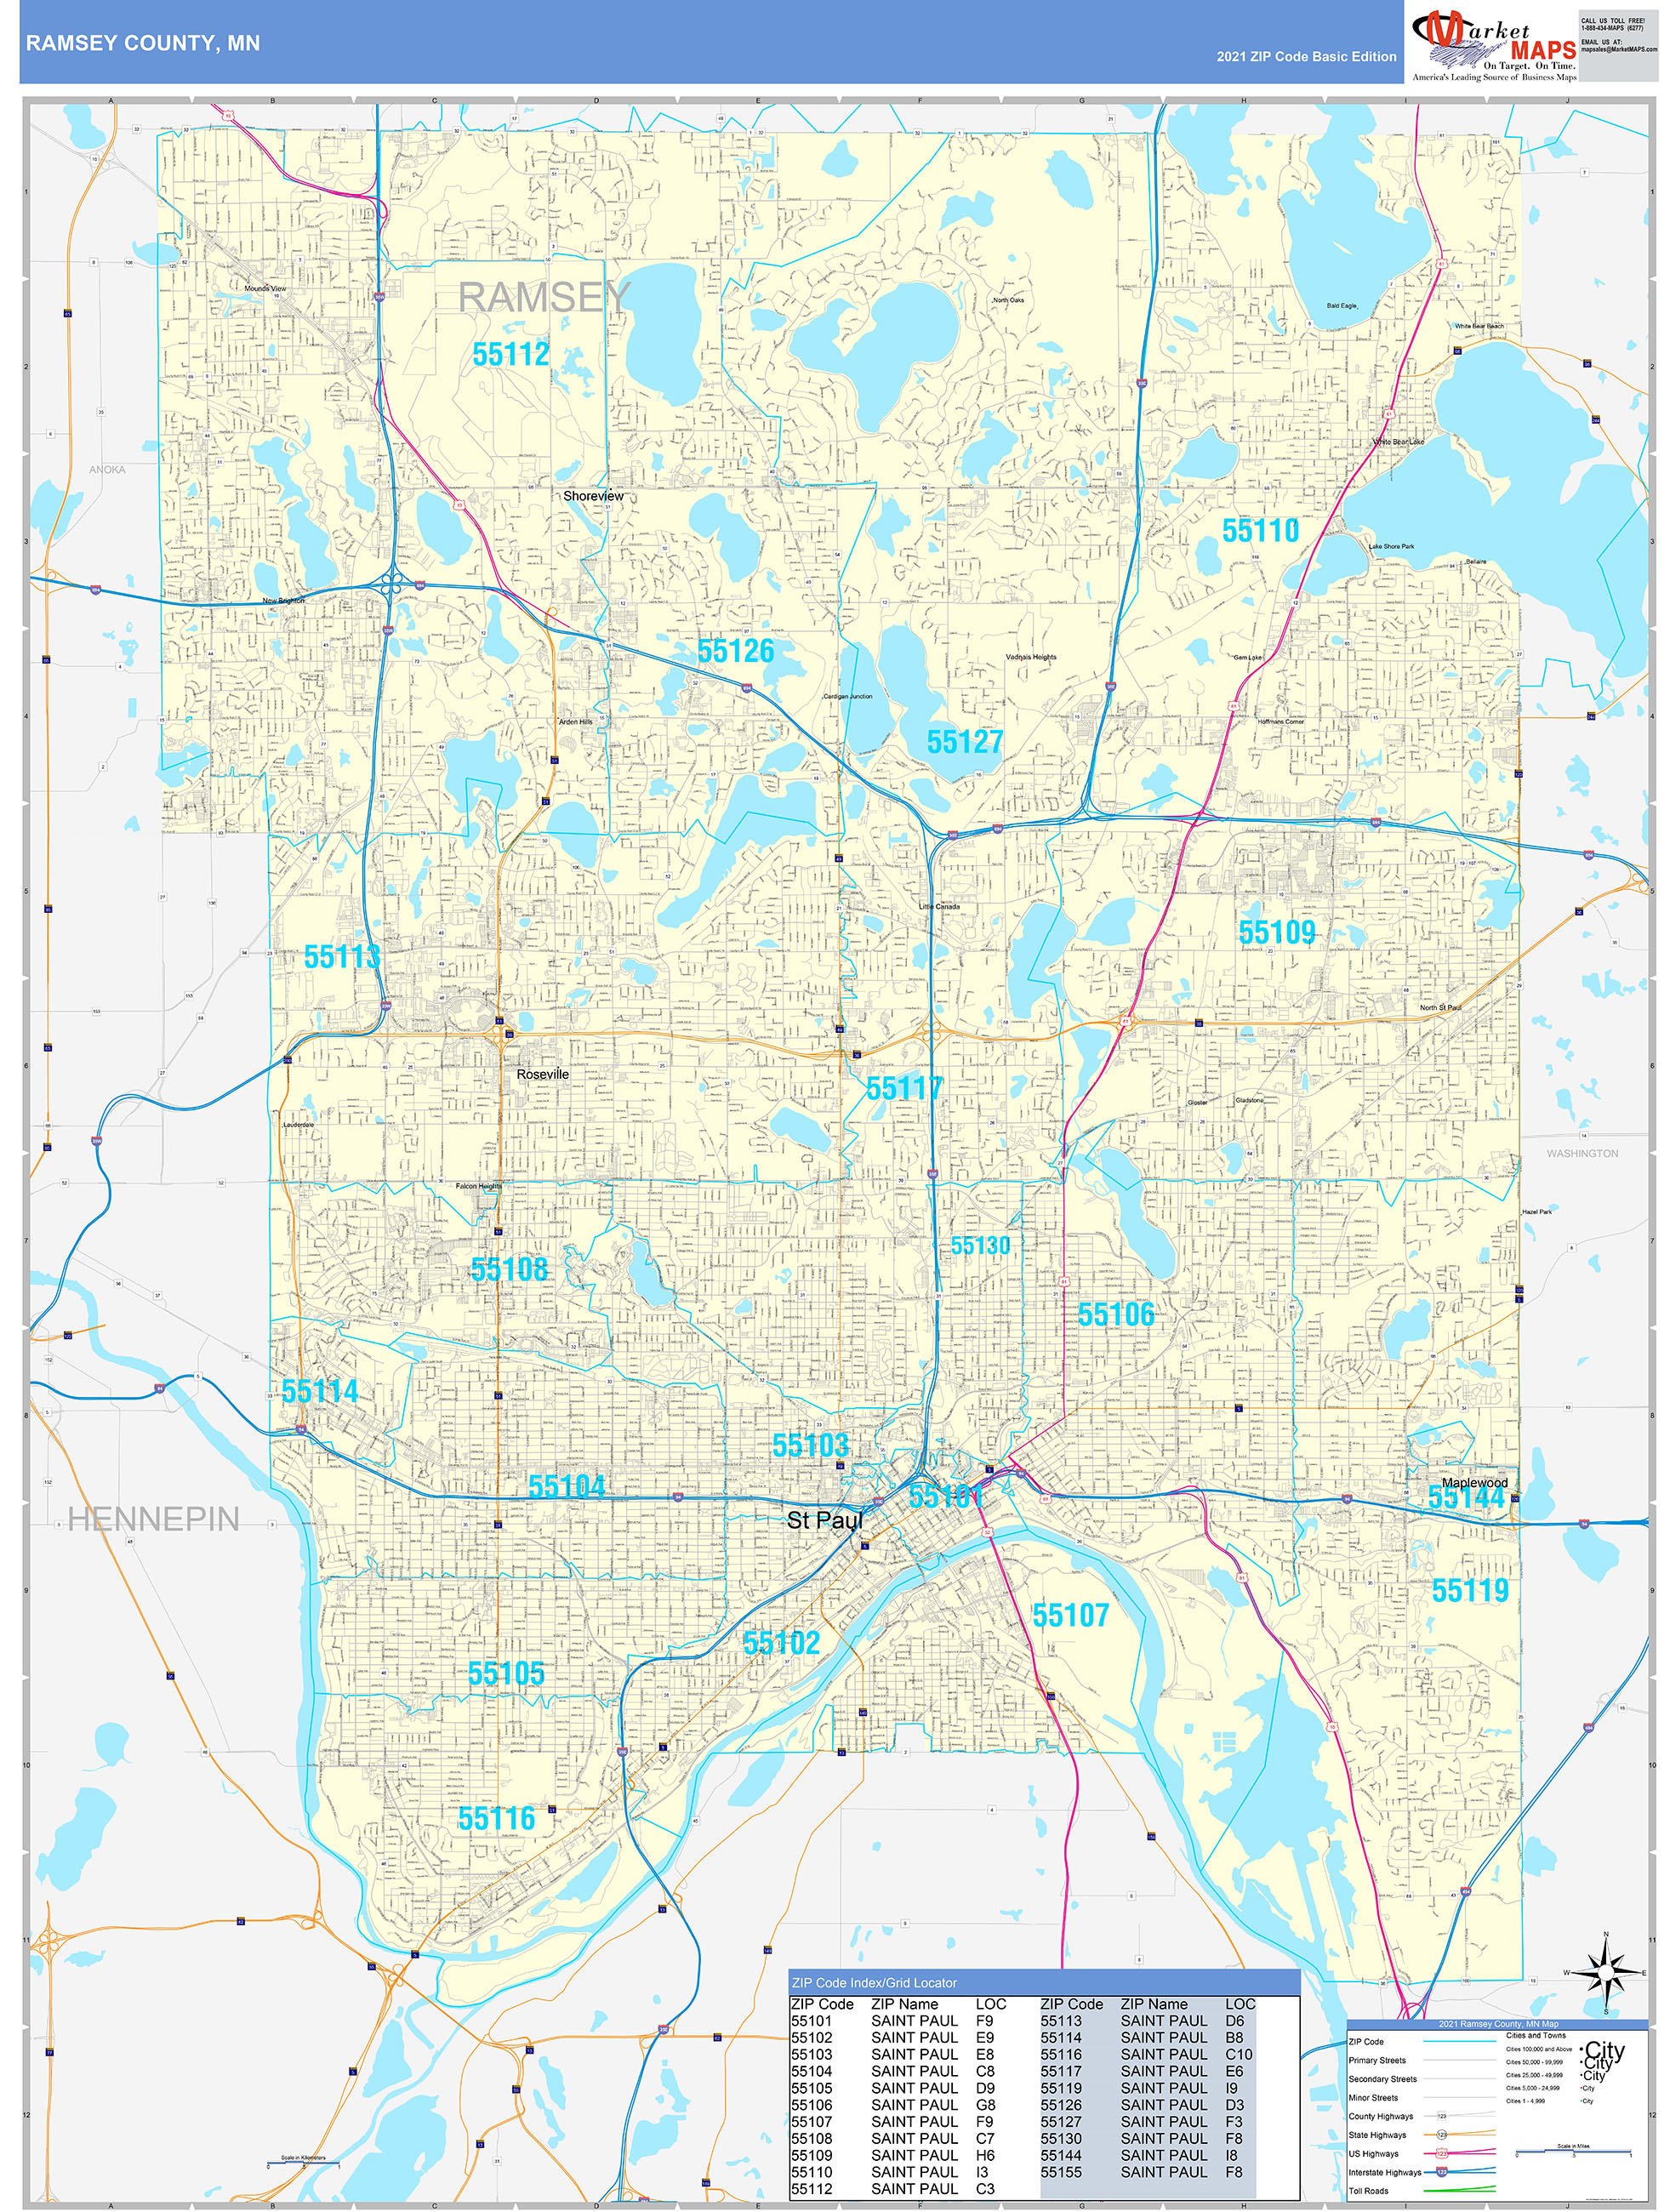 Ramsey County, MN Zip Code Wall Map Basic Style by MarketMAPS MapSales